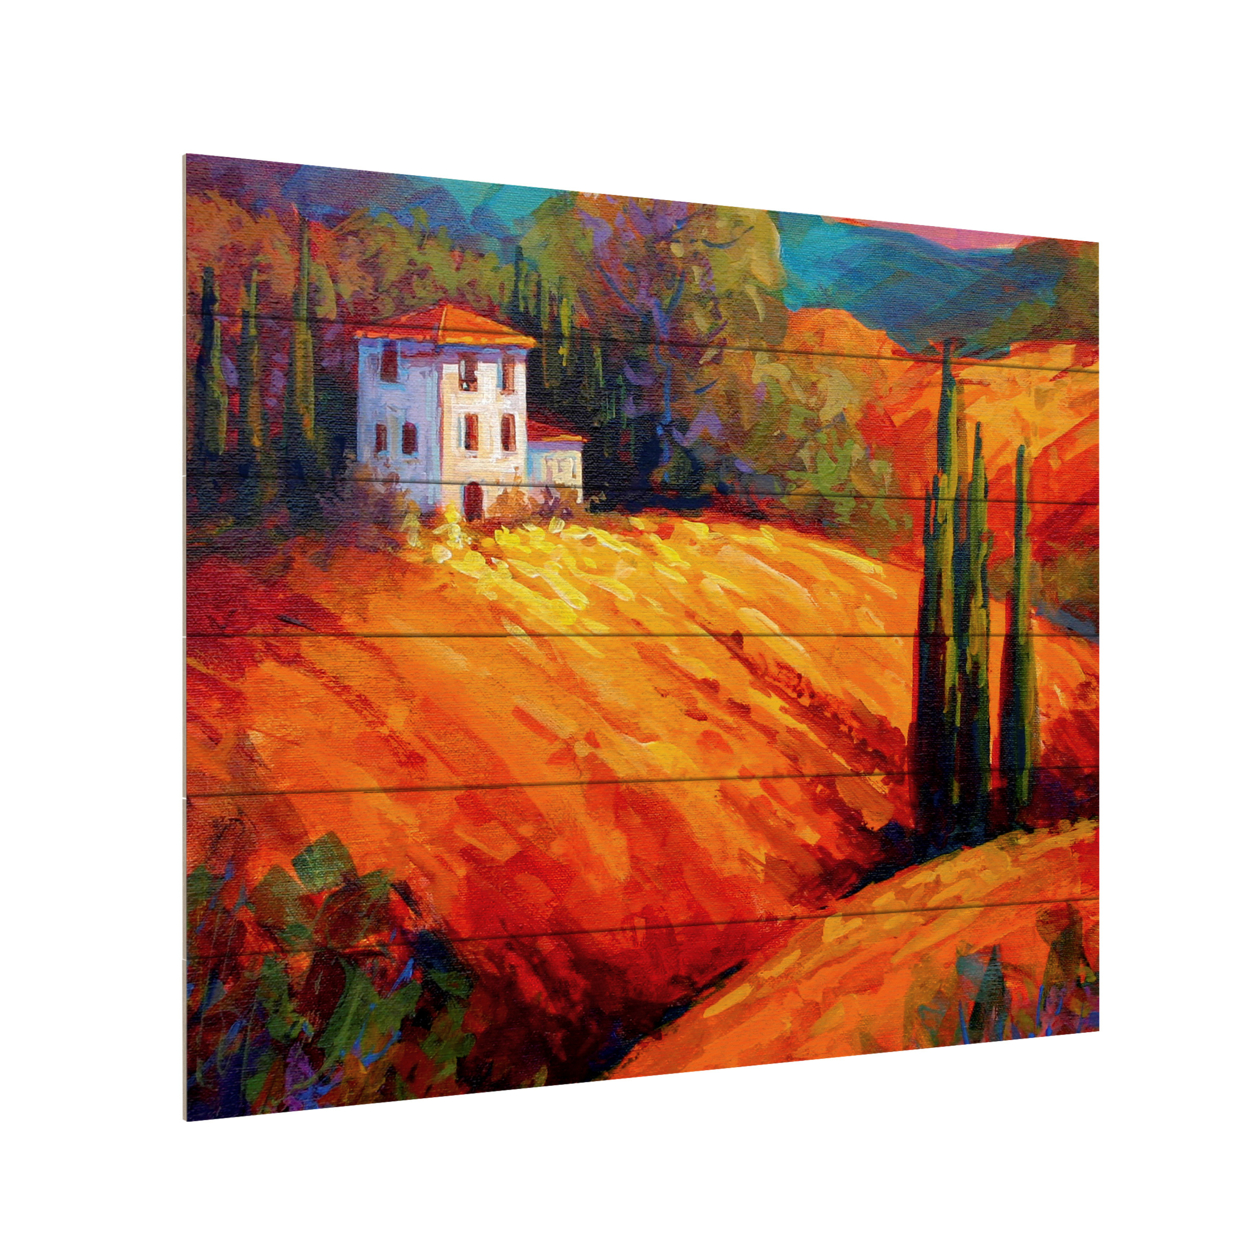 Wooden Slat Art 18 X 22 Inches Titled Tuscan Villa Evening Ready To Hang Home Decor Picture